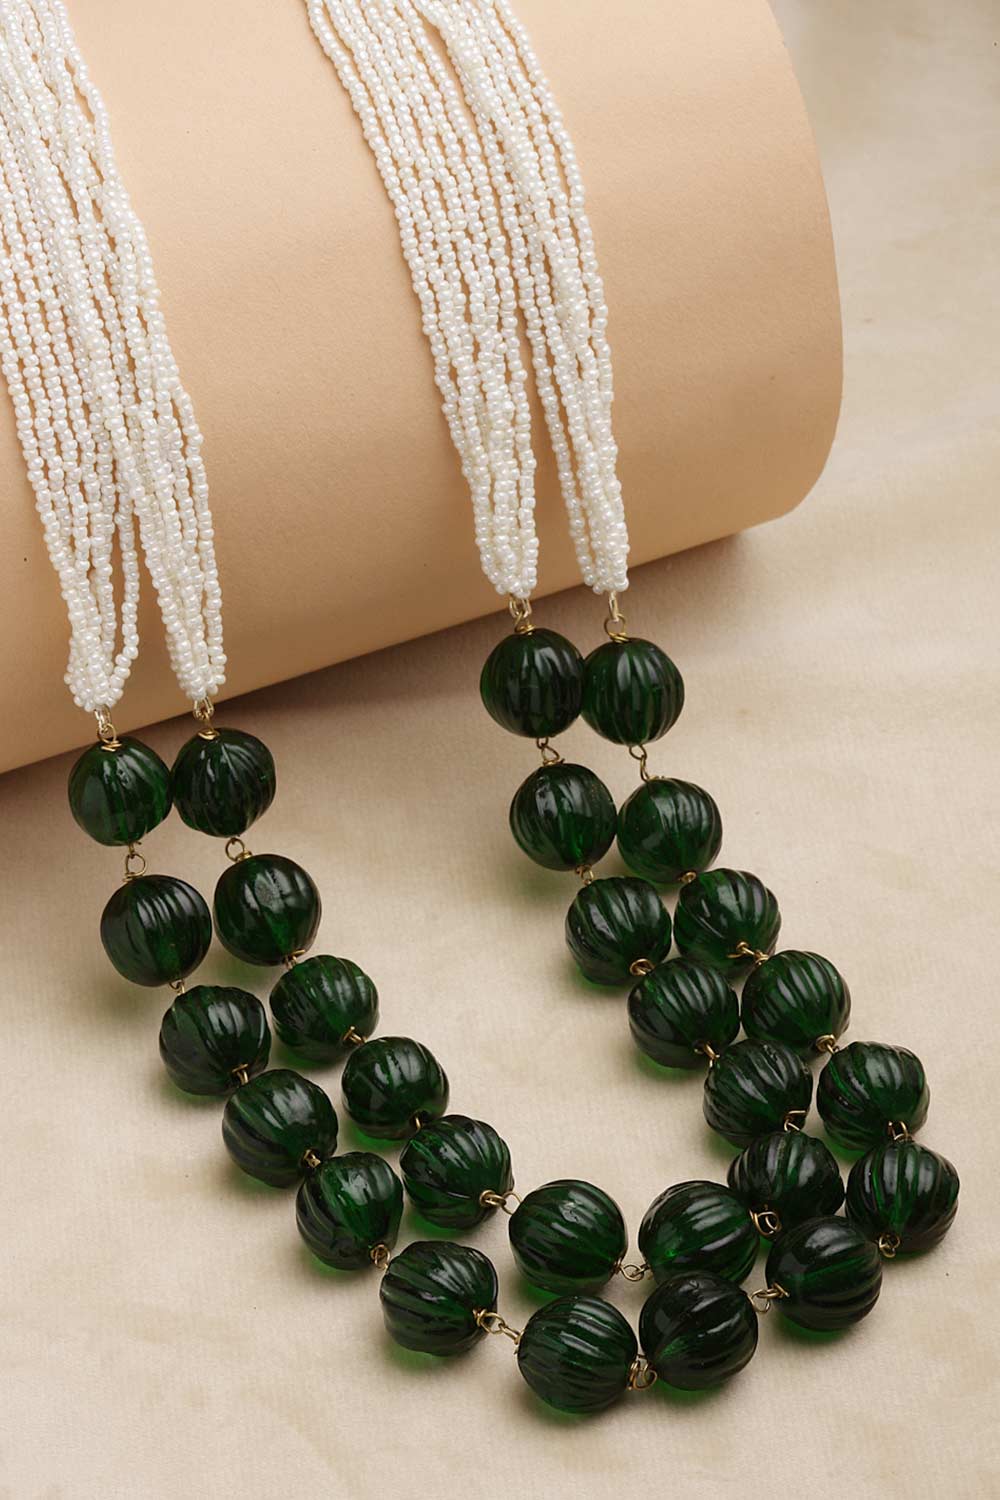 Green And Gold Gold-Plated Pearls And Natural Stones Bead Necklaces